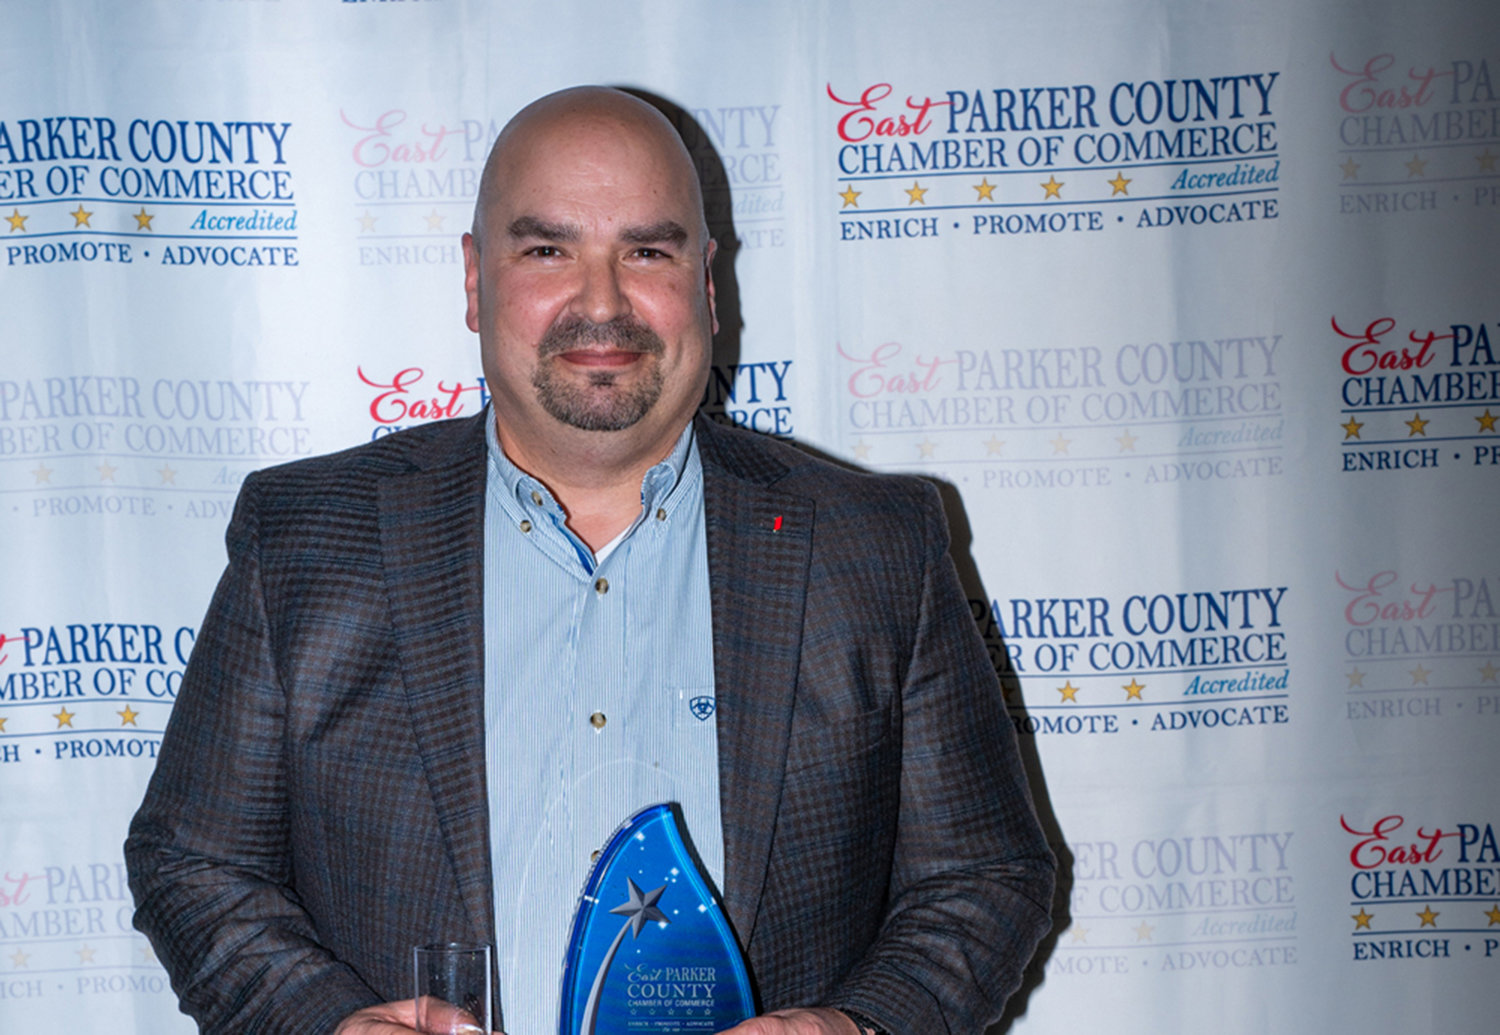 Paul Bruns of First Financial Bank won the Businessperson of the Year Award.